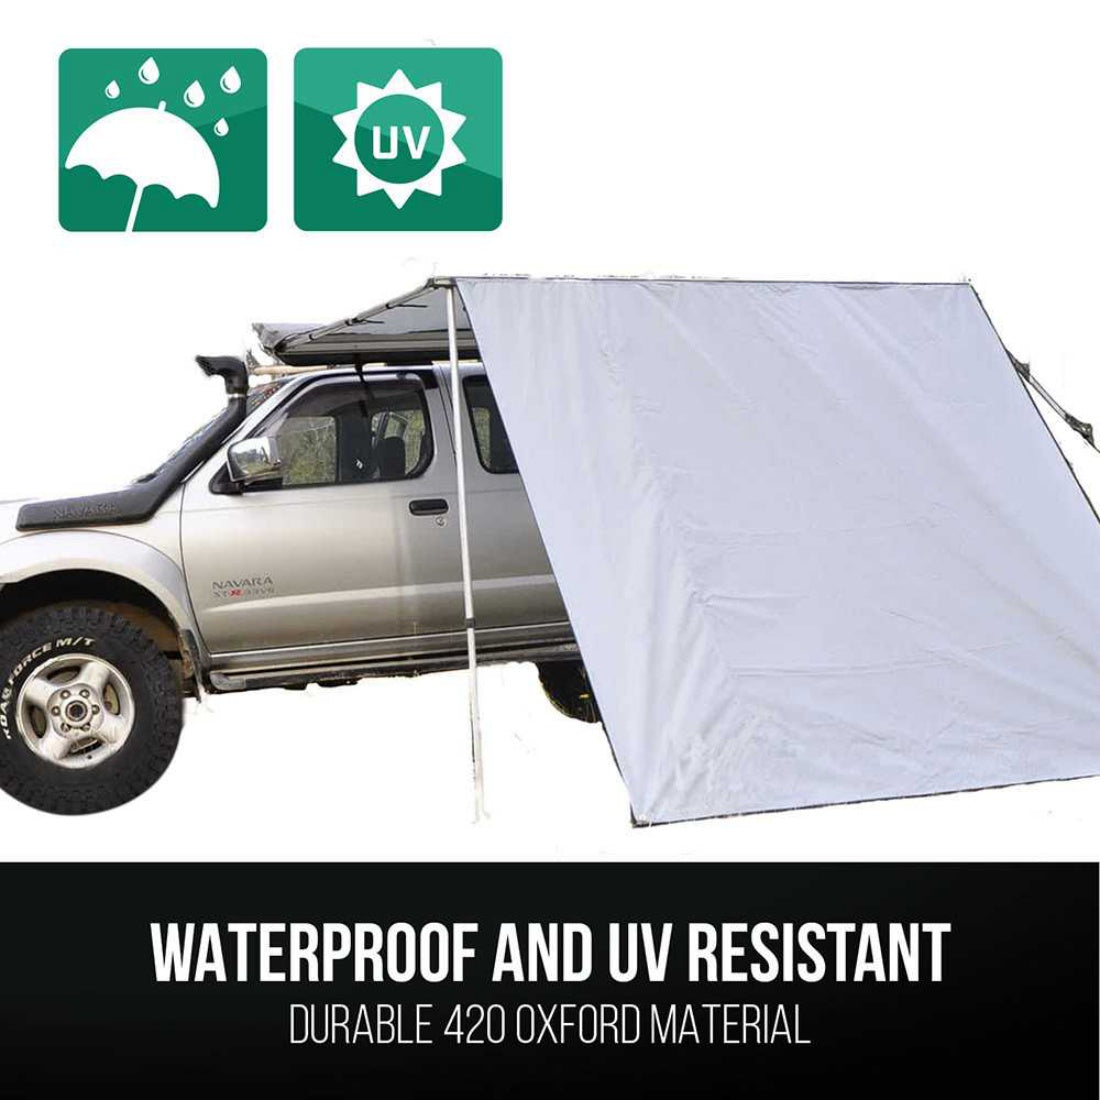 New Awning Roof Tent 3m x 3m + Extension 3m x 2m Camping Trailer 4WD Car Rack